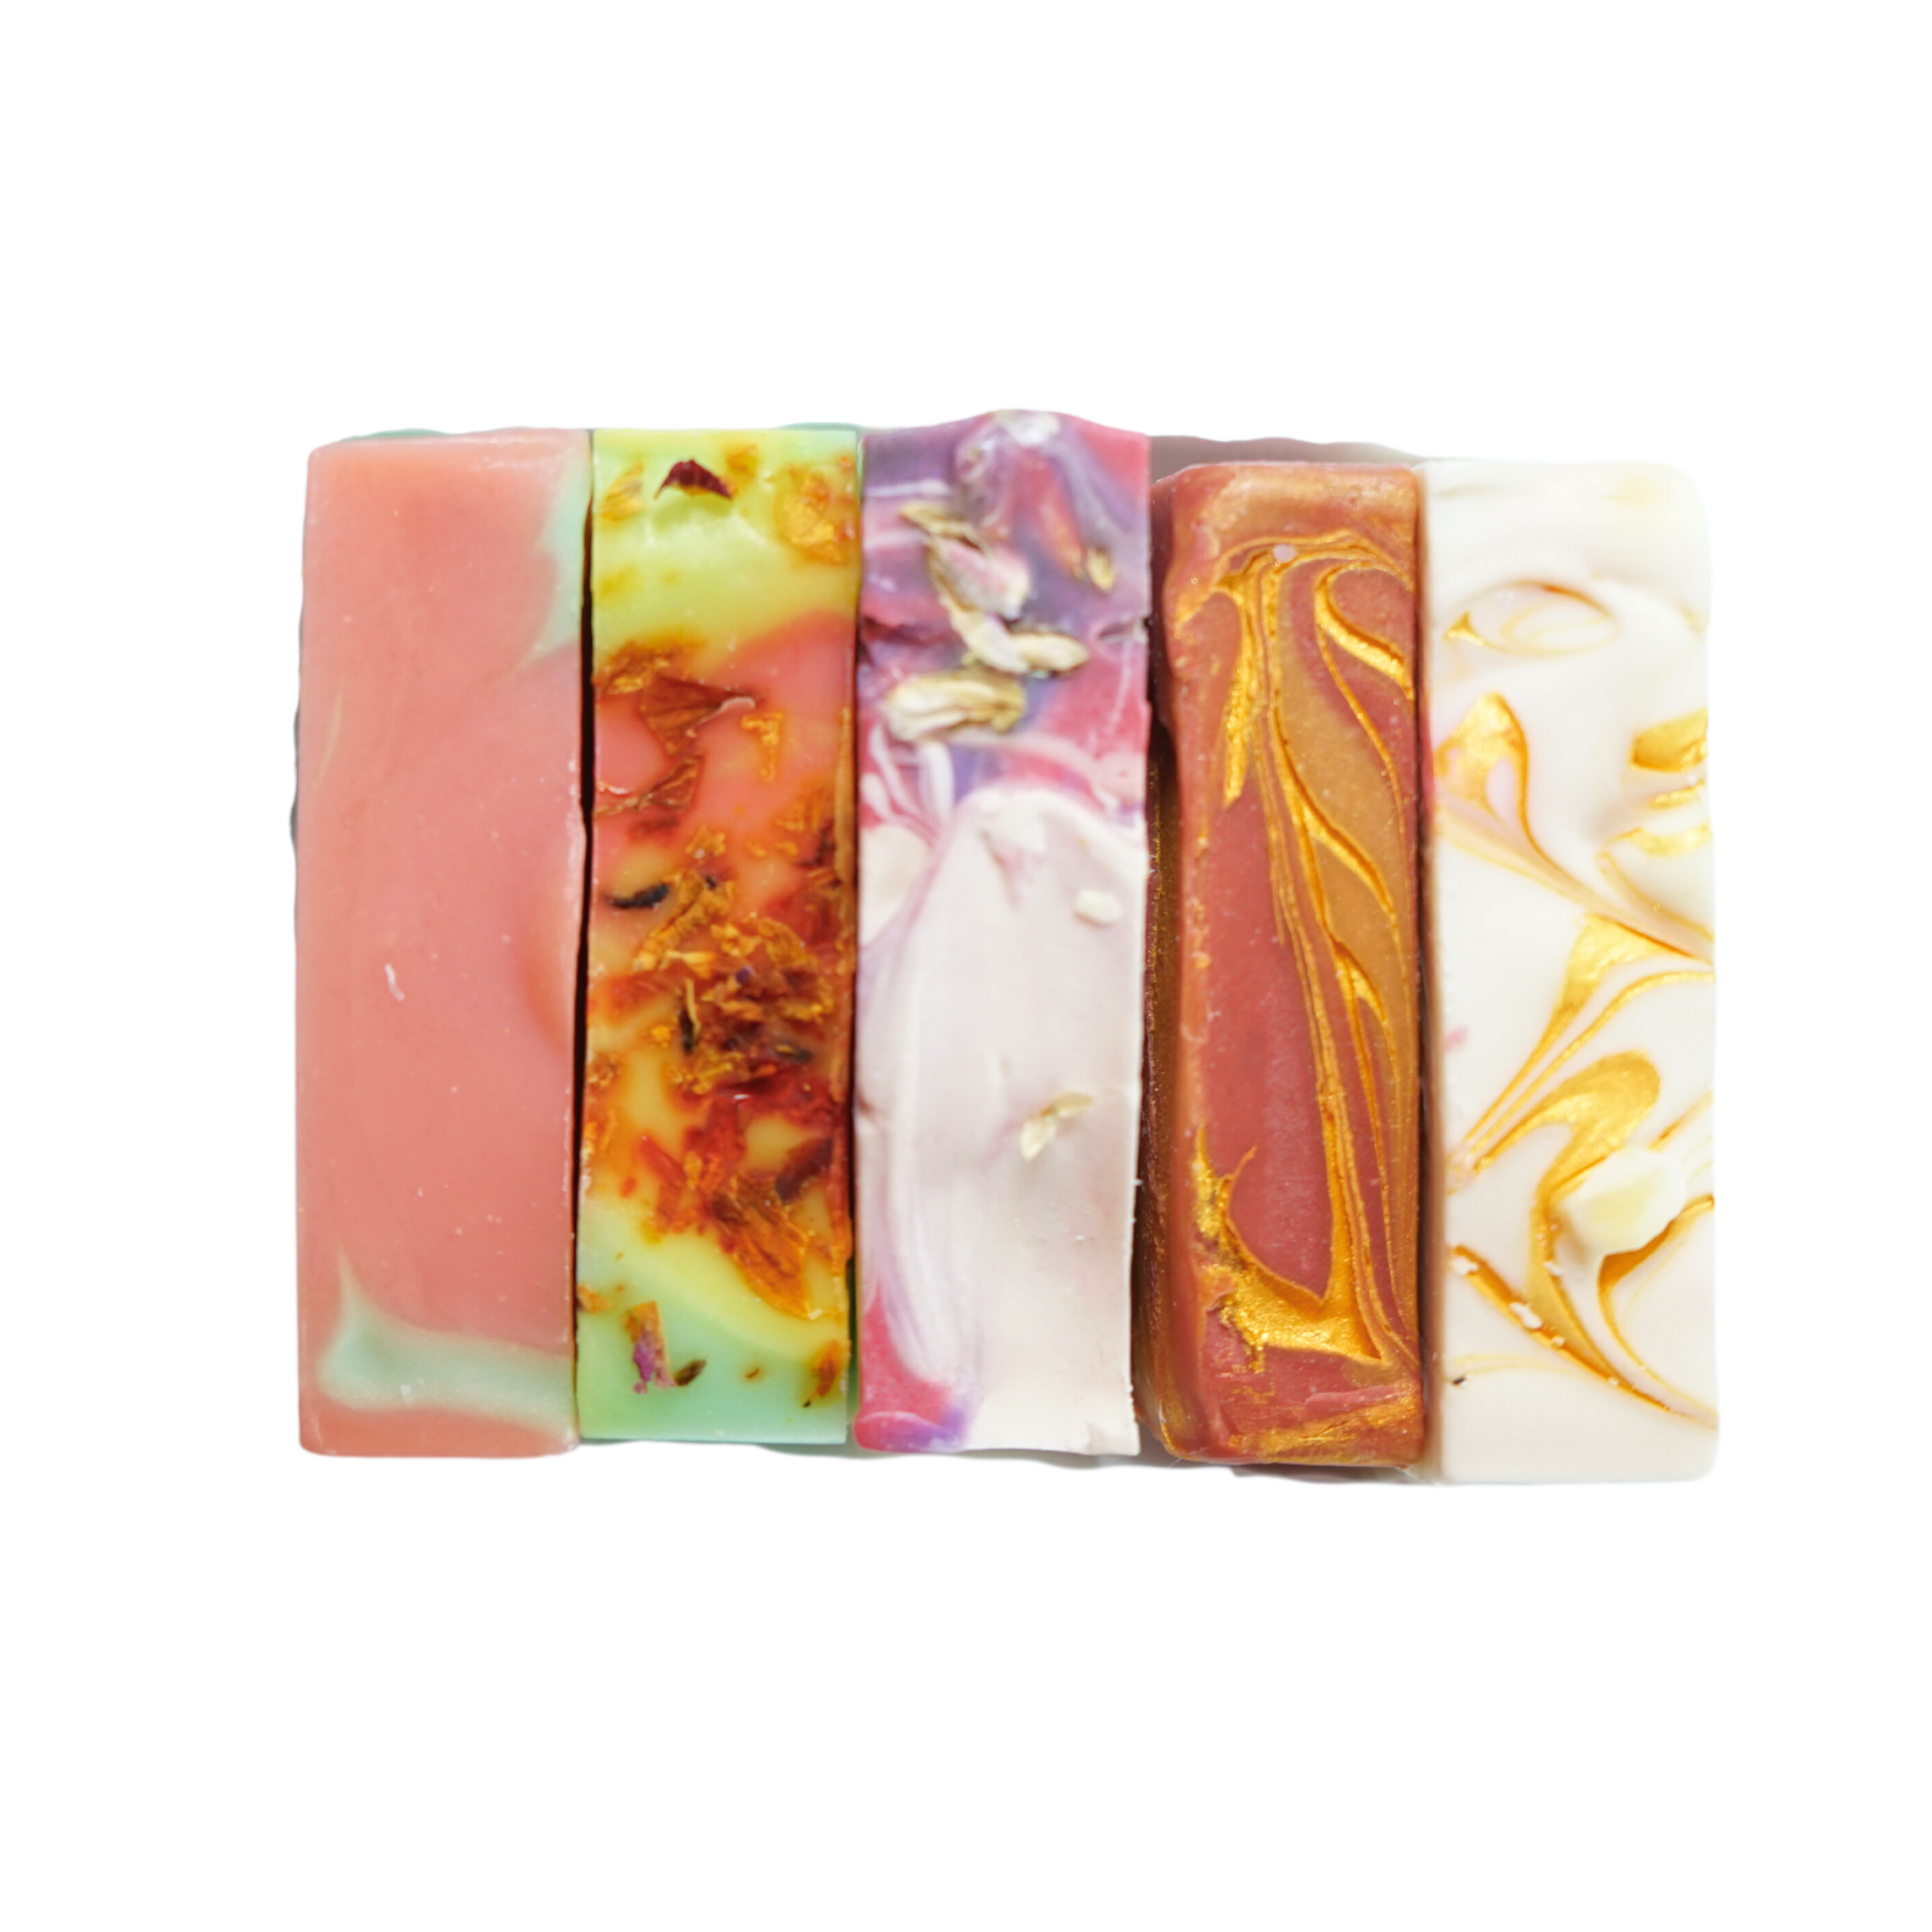 Scented Handmade Soaps: A Treat for Your Senses